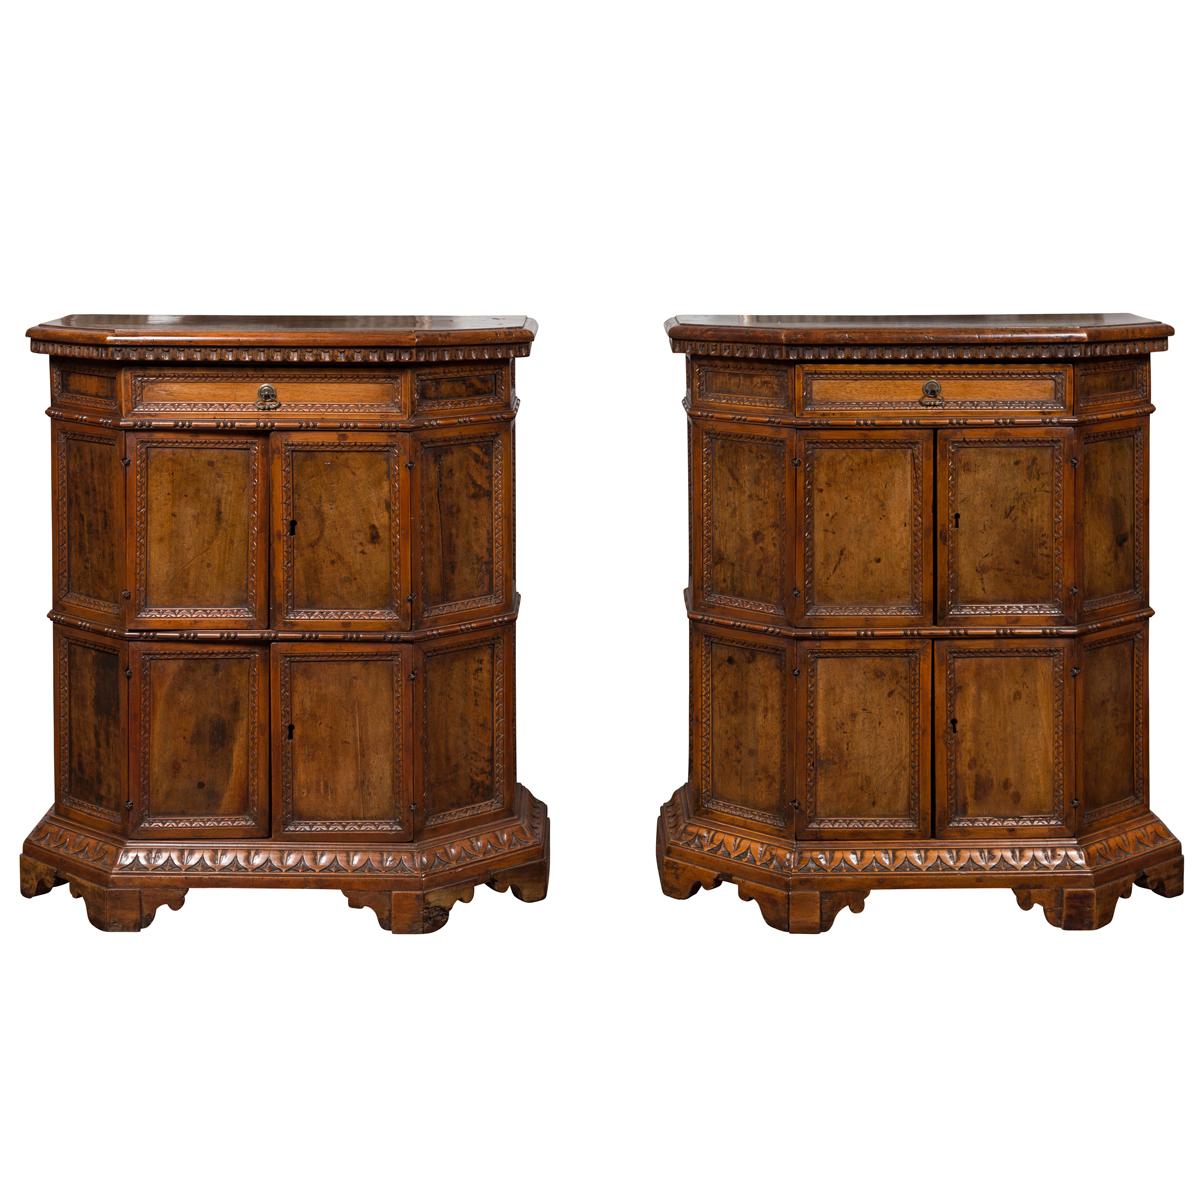 Pair of 1800s Italian Carved Walnut Cabinets with Canted Sides, Drawer and Doors For Sale